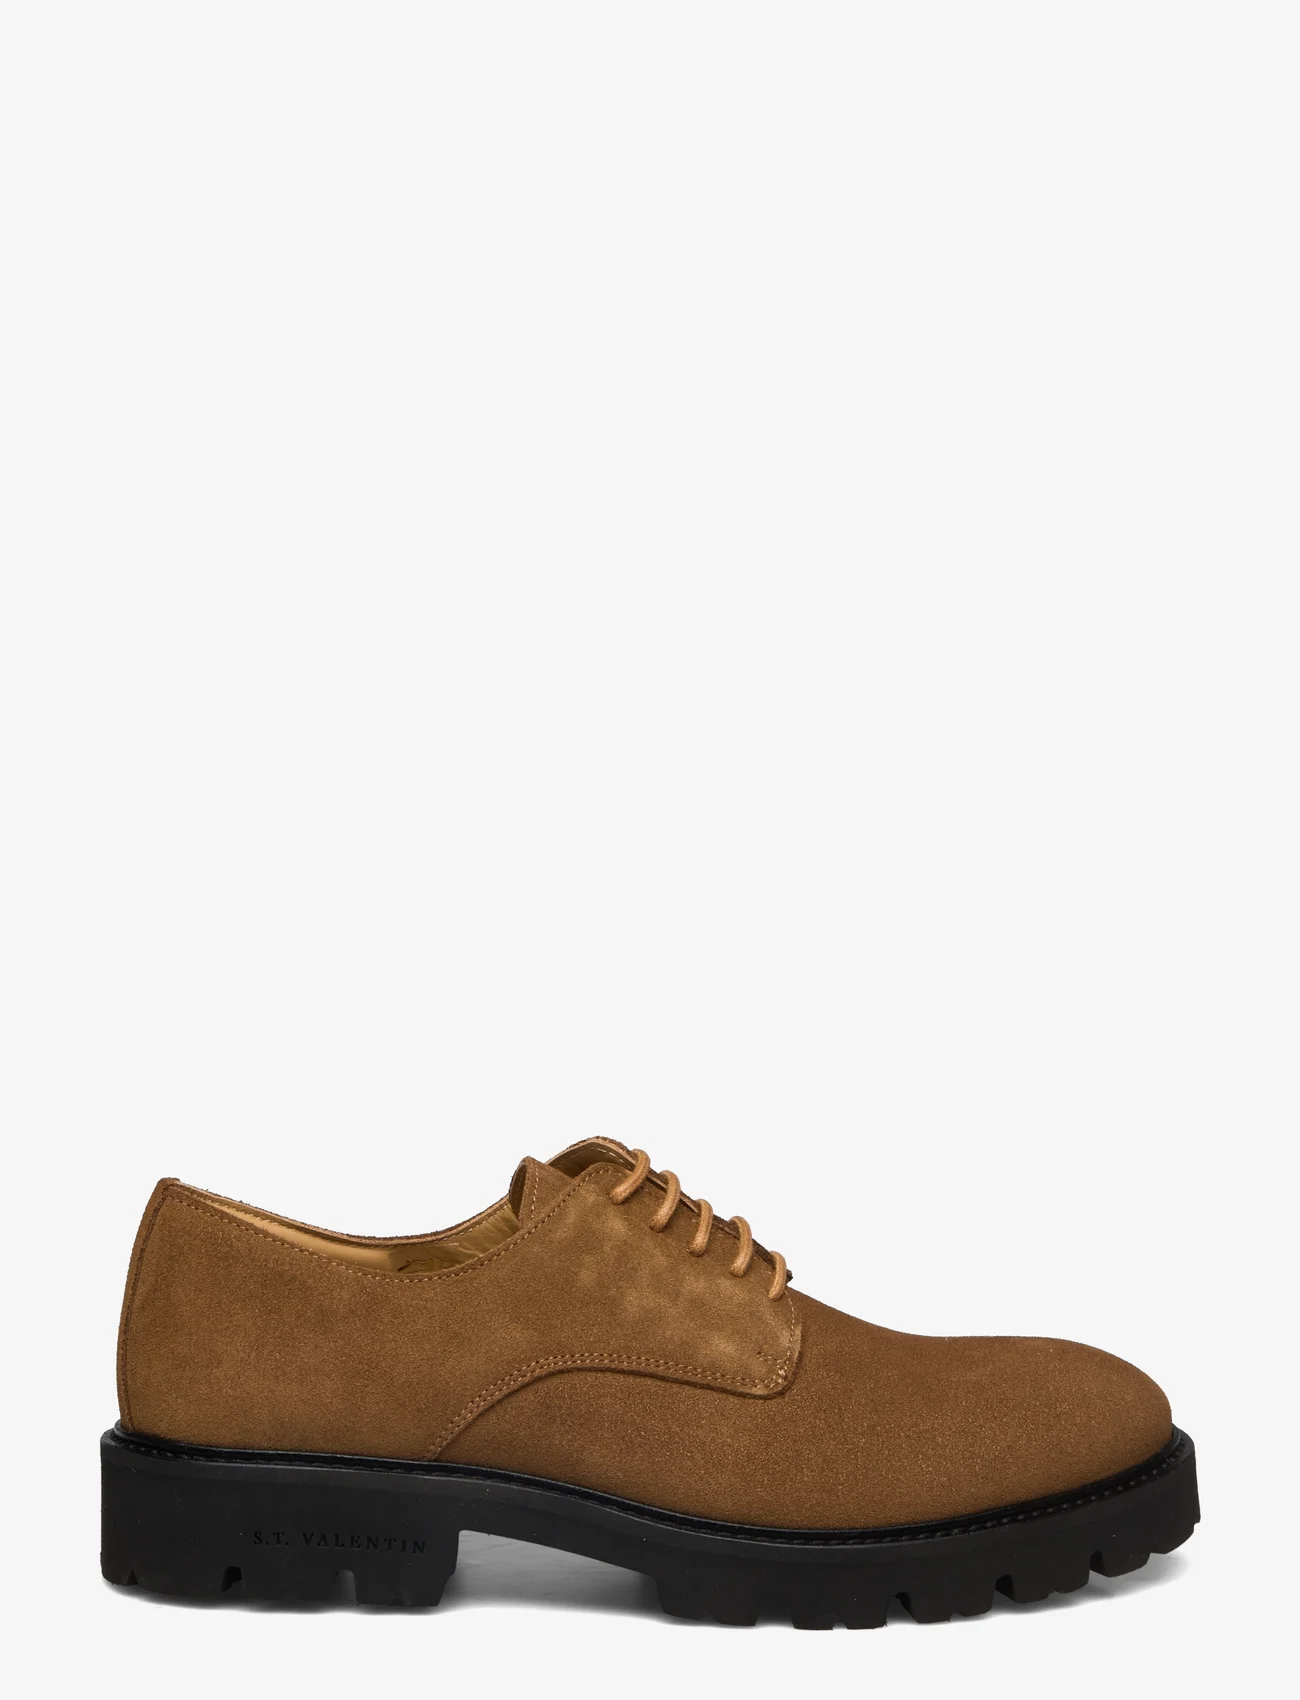 S.T. VALENTIN - Lightweight Derby - Grained leather - laced shoes - tobacco - 1